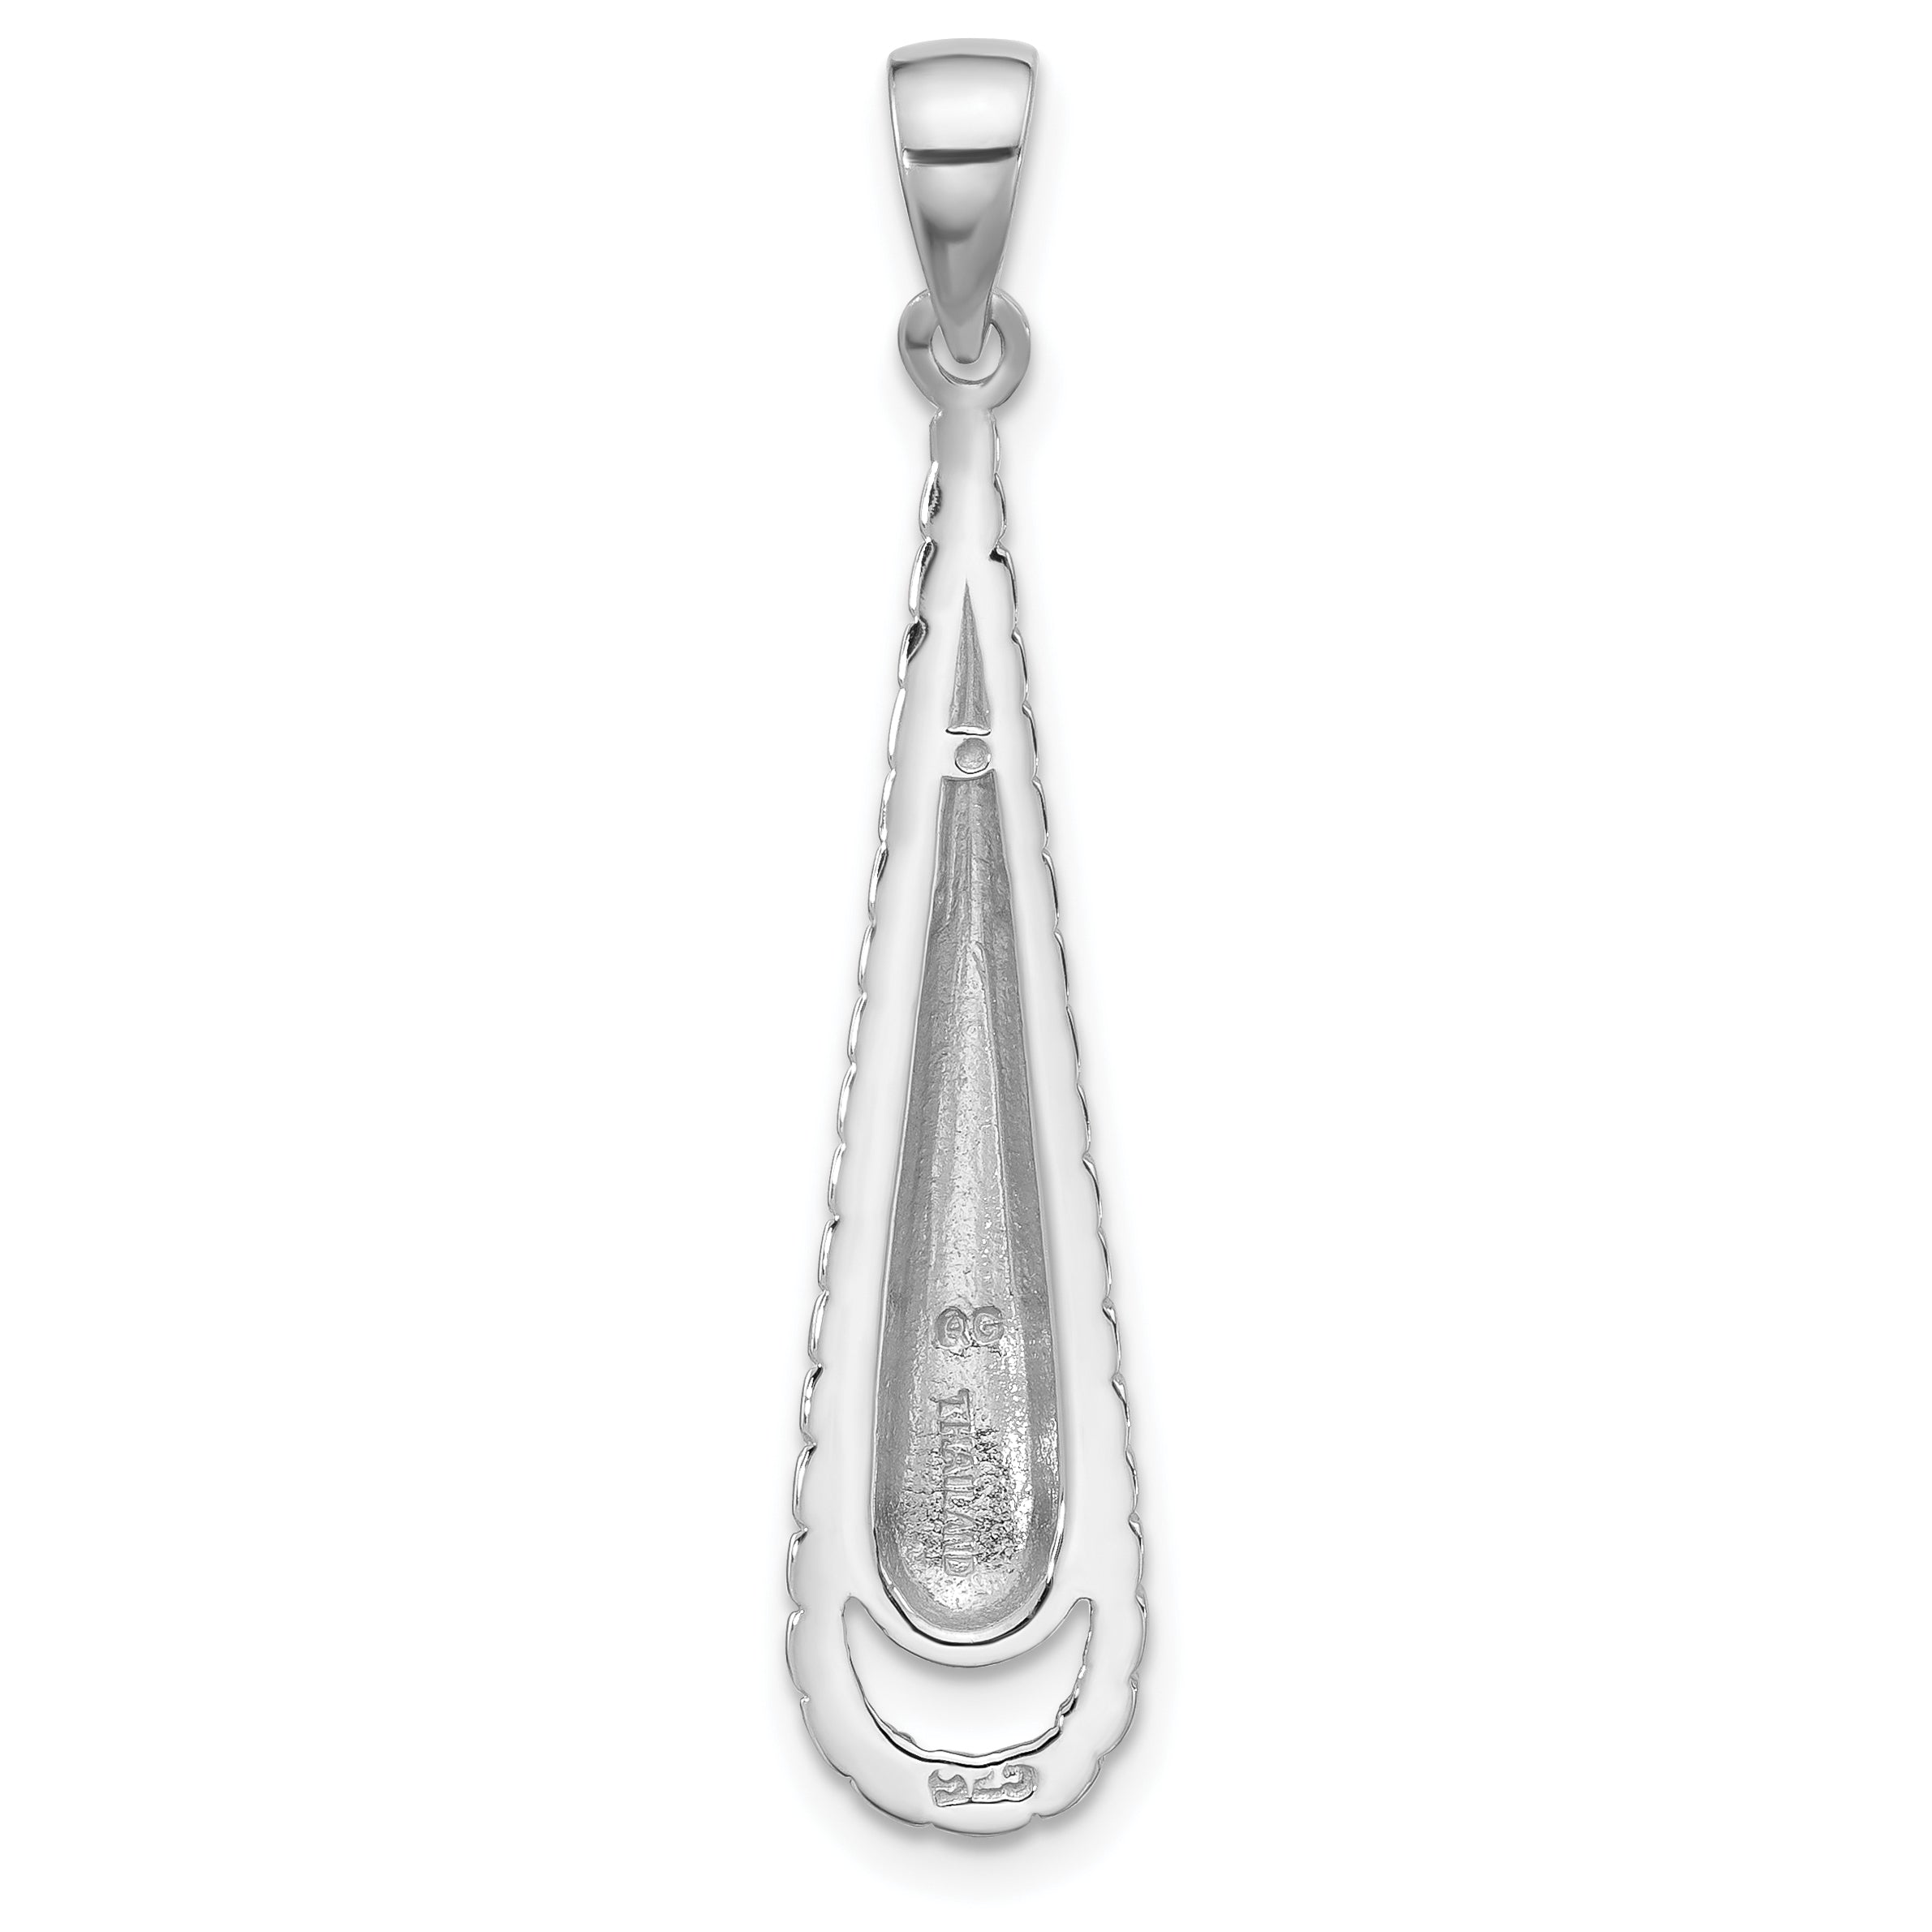 Sterling Silver Rhodium-Plated Polished Textured Long Teardrop Pendant